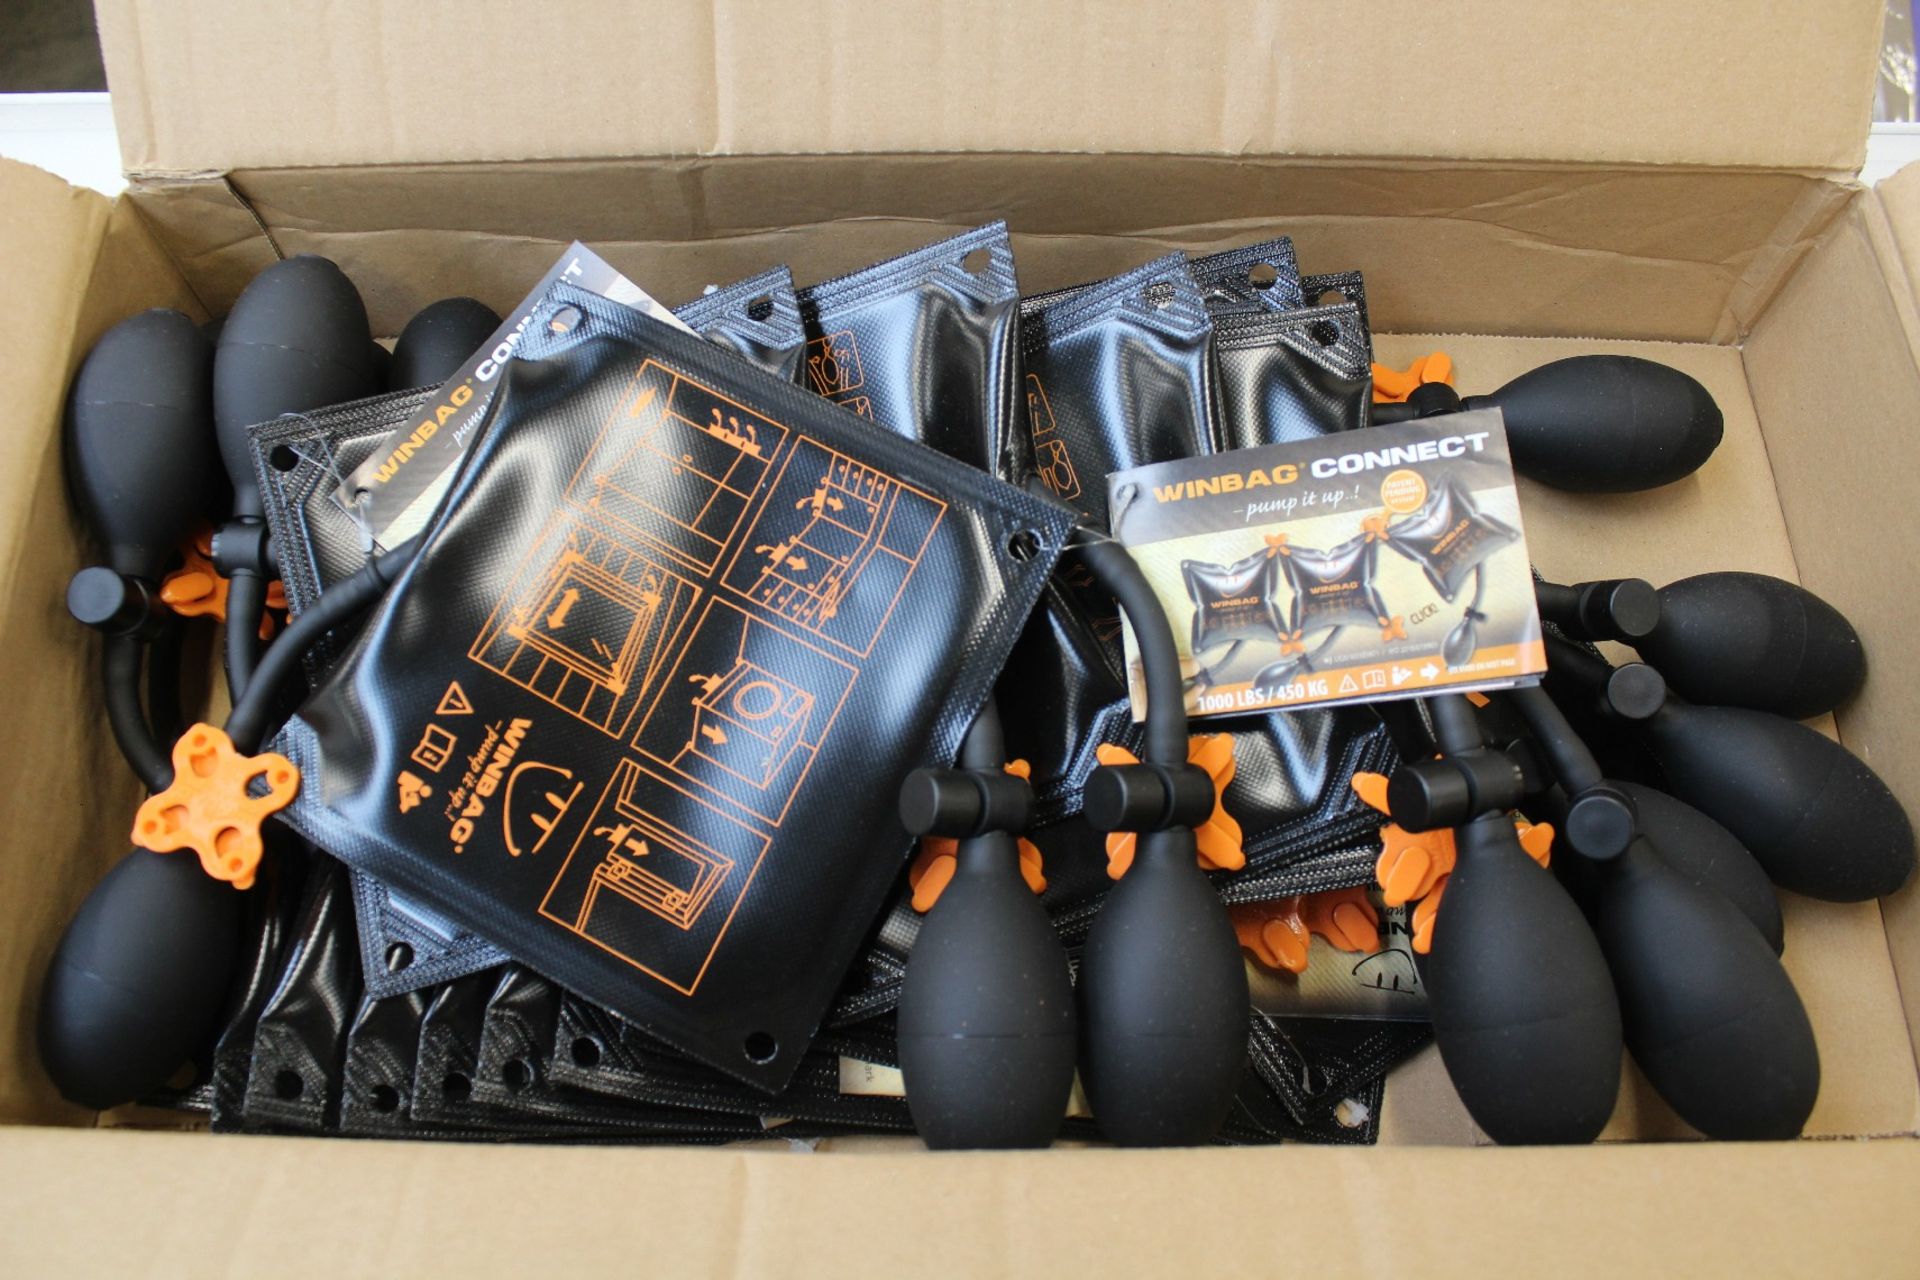 Twenty as new Winbag Connect inflatable air wedges (1000lb/450kg).